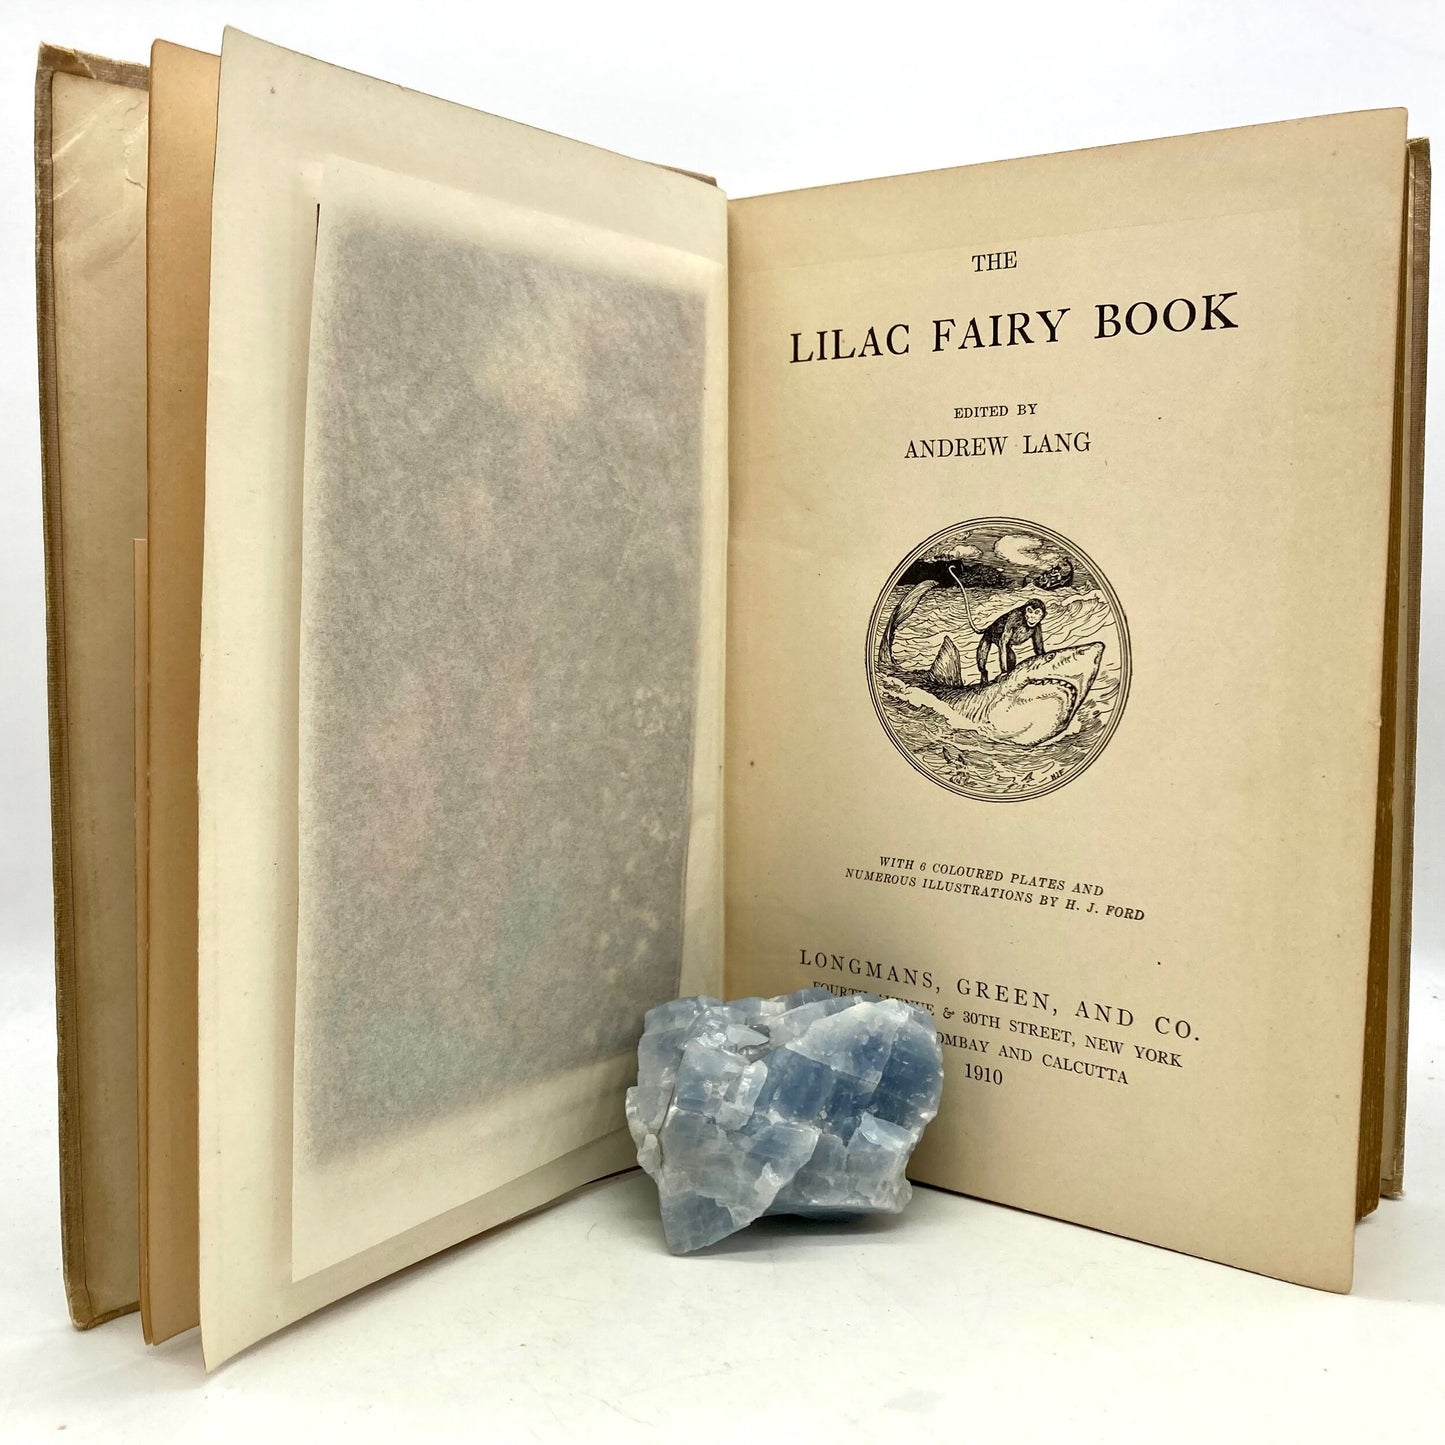 LANG, Andrew "The Lilac Fairy Book" [Longmans, Green & Co, 1910] 1st Edition - Buzz Bookstore